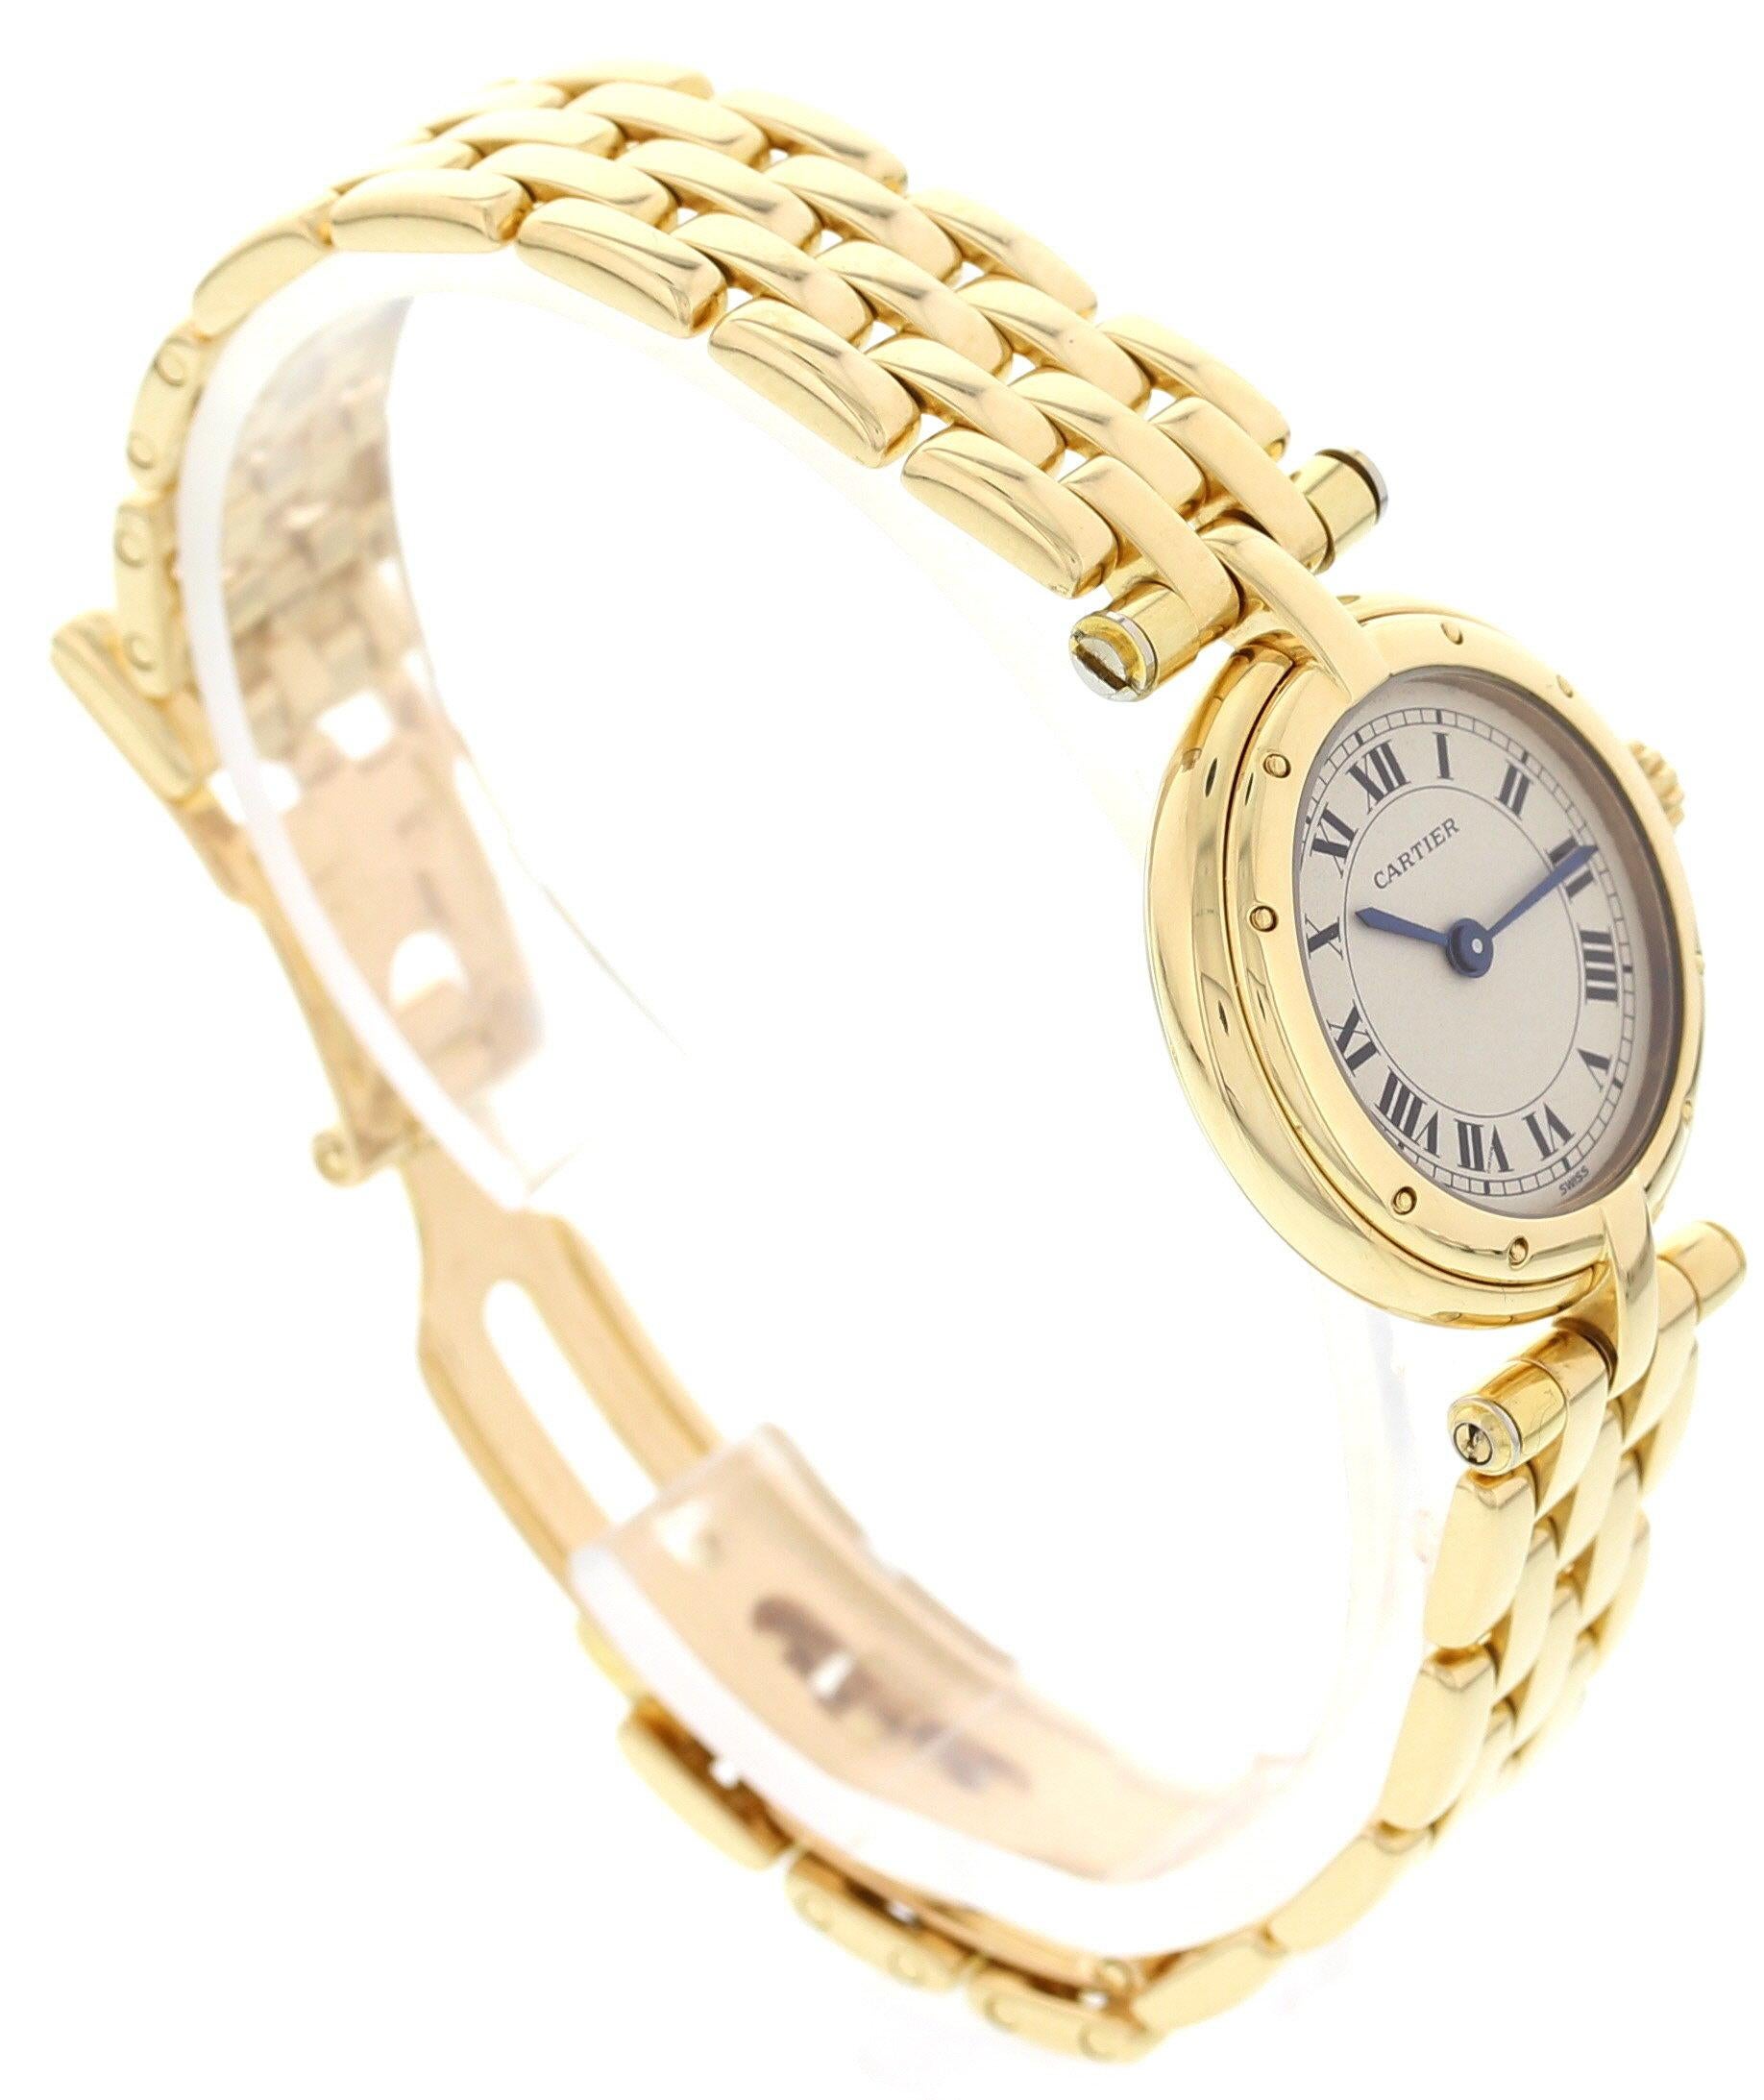 Ladies Cartier Cougar 18 Karat Yellow Gold Watch In Good Condition For Sale In New York, NY